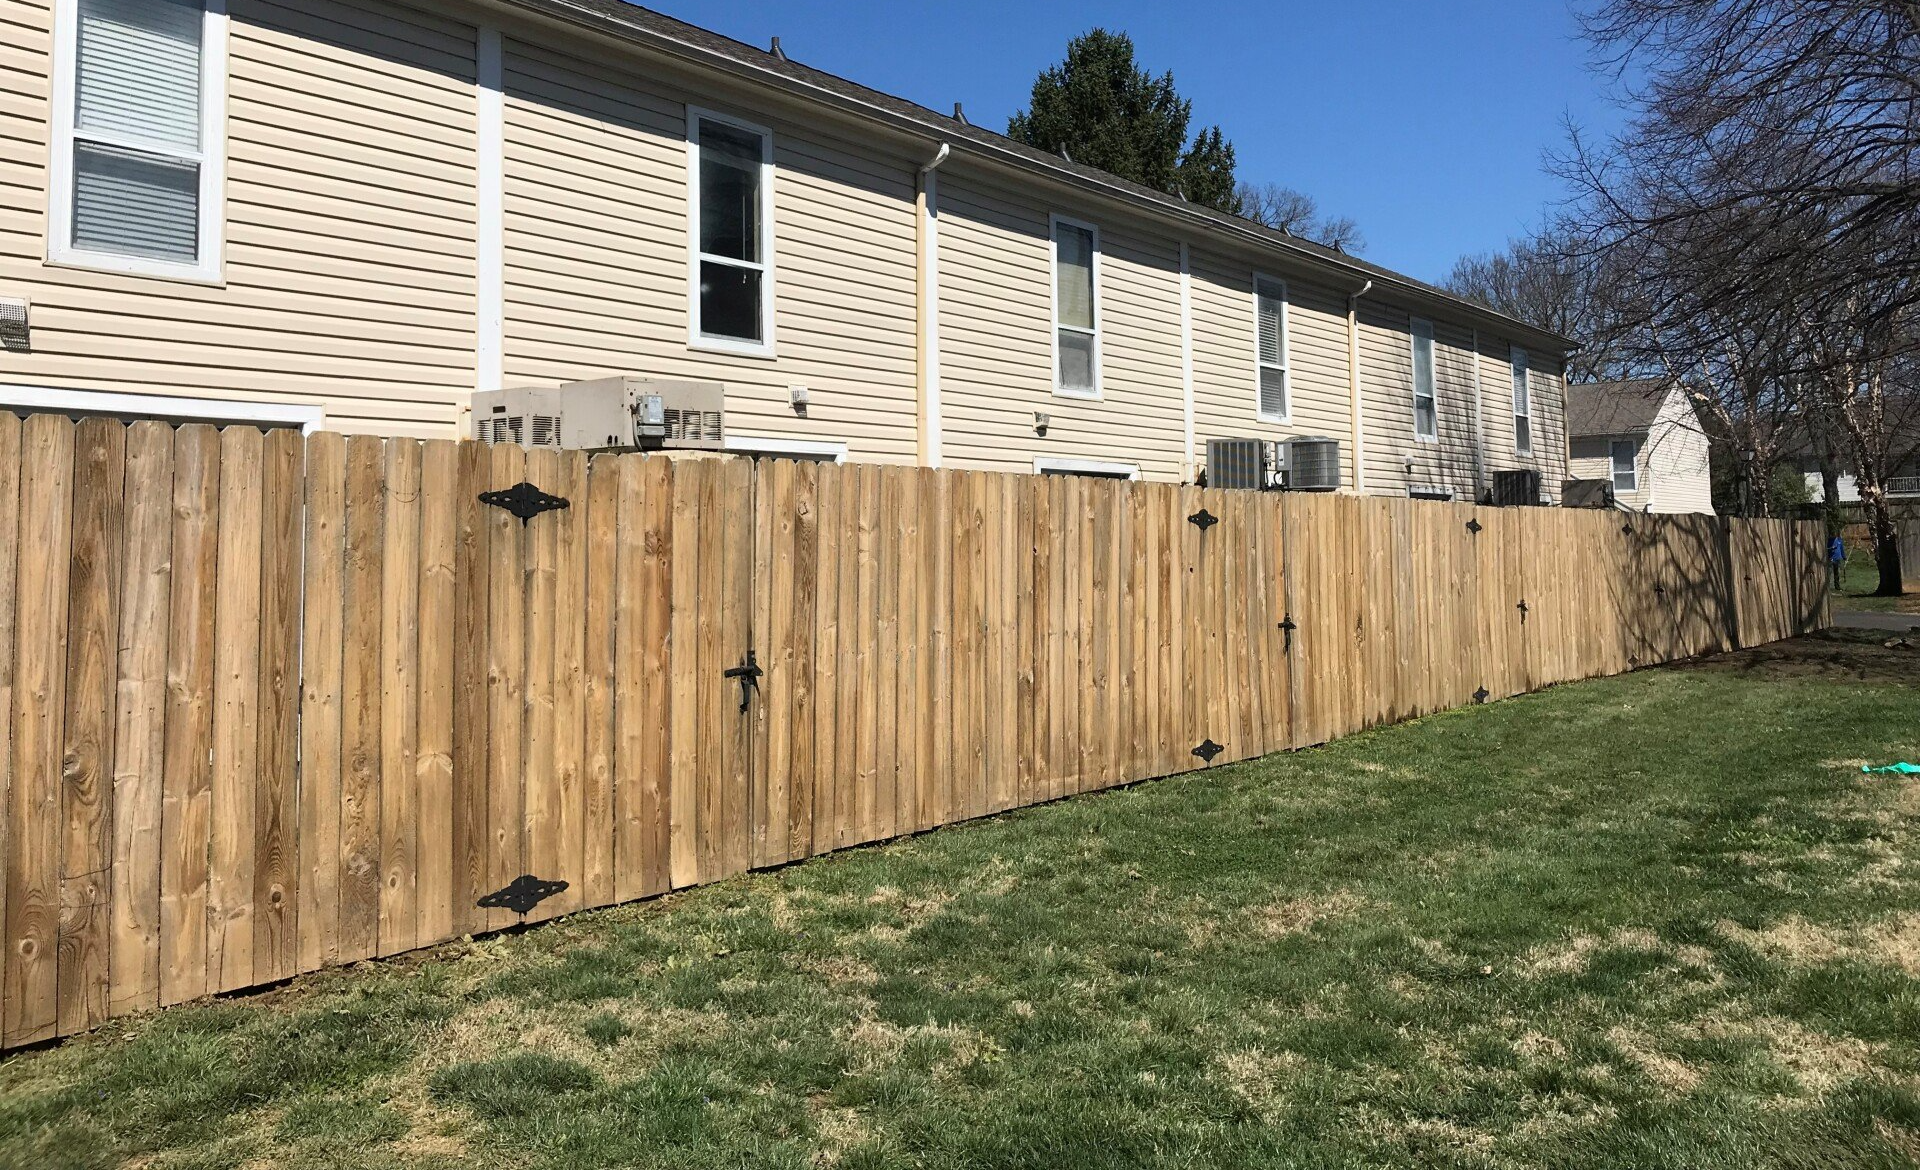 Siding After Cleaning — Crestwood, KY — Advanced Cleaning Services